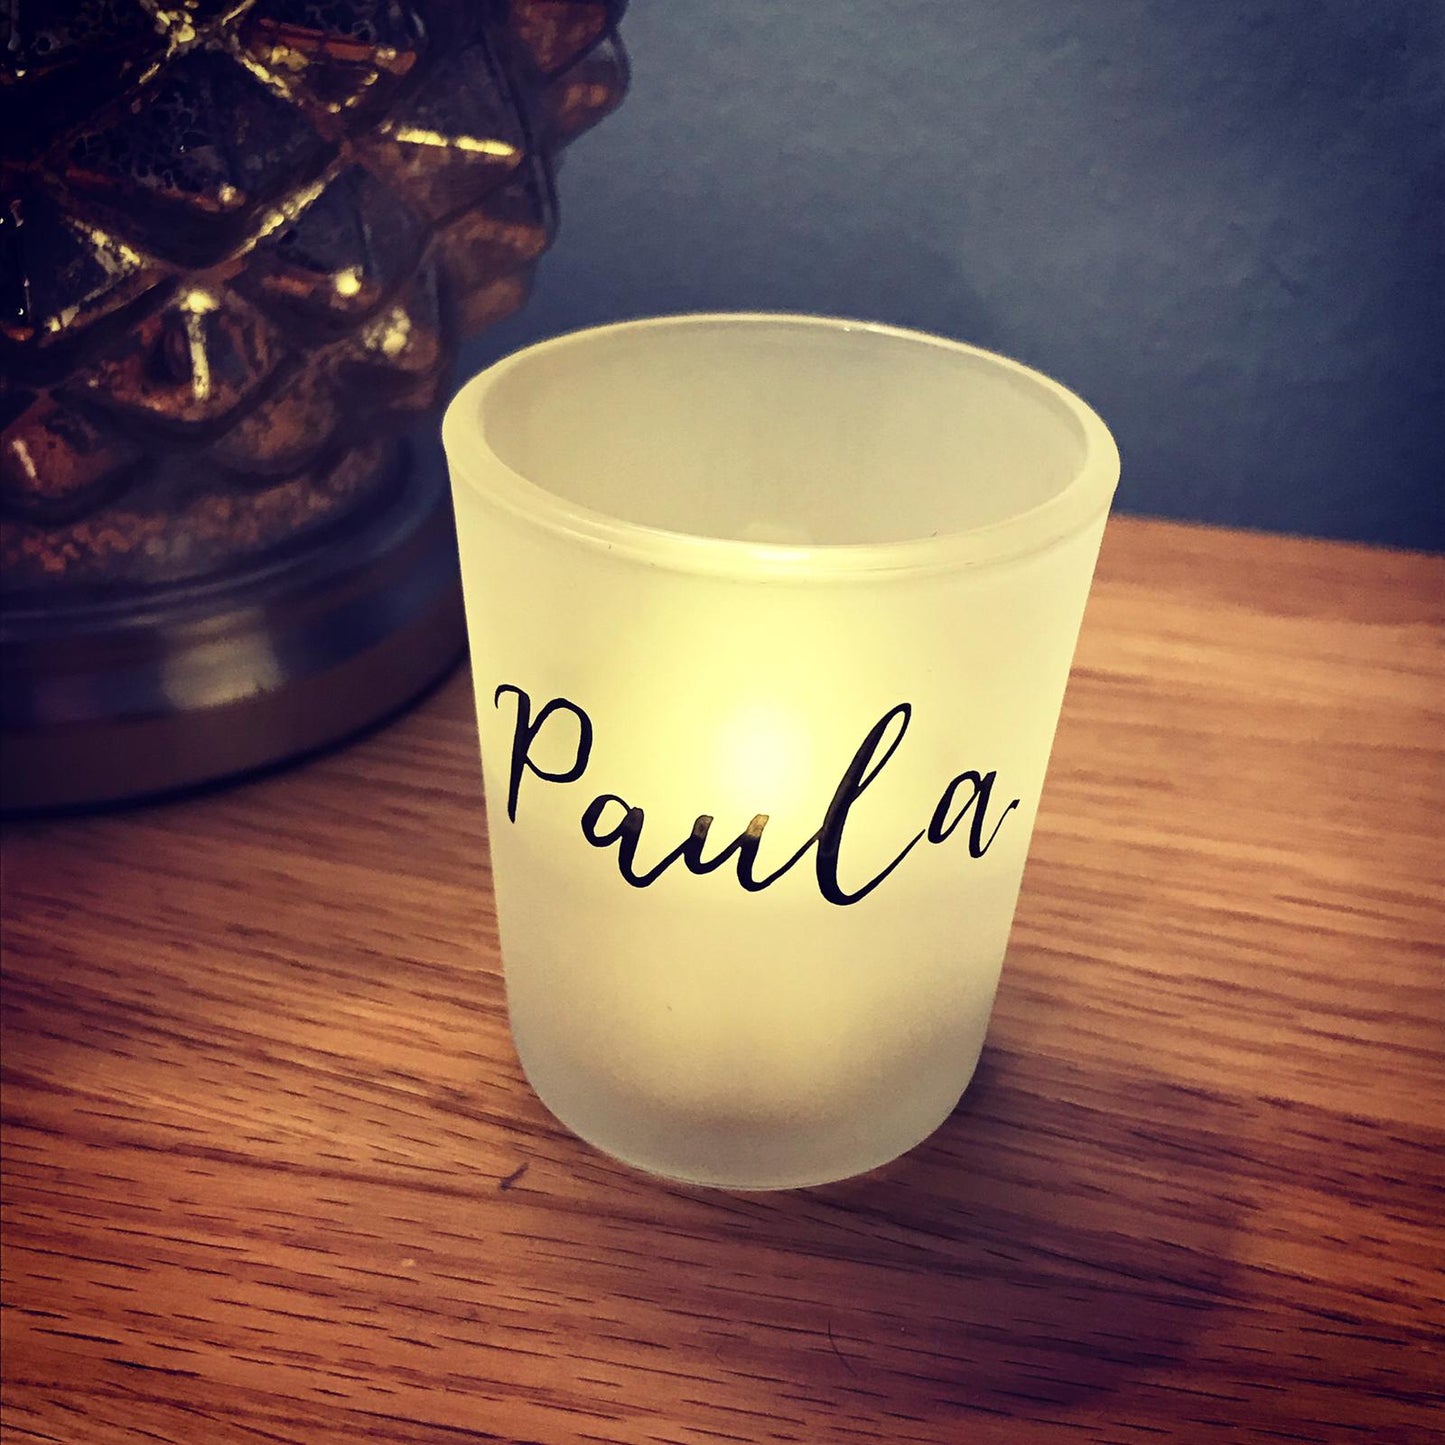 TEA LIGHT VOTIVE WITH GUEST NAME IN BLACK INK CALLIGRAPHY